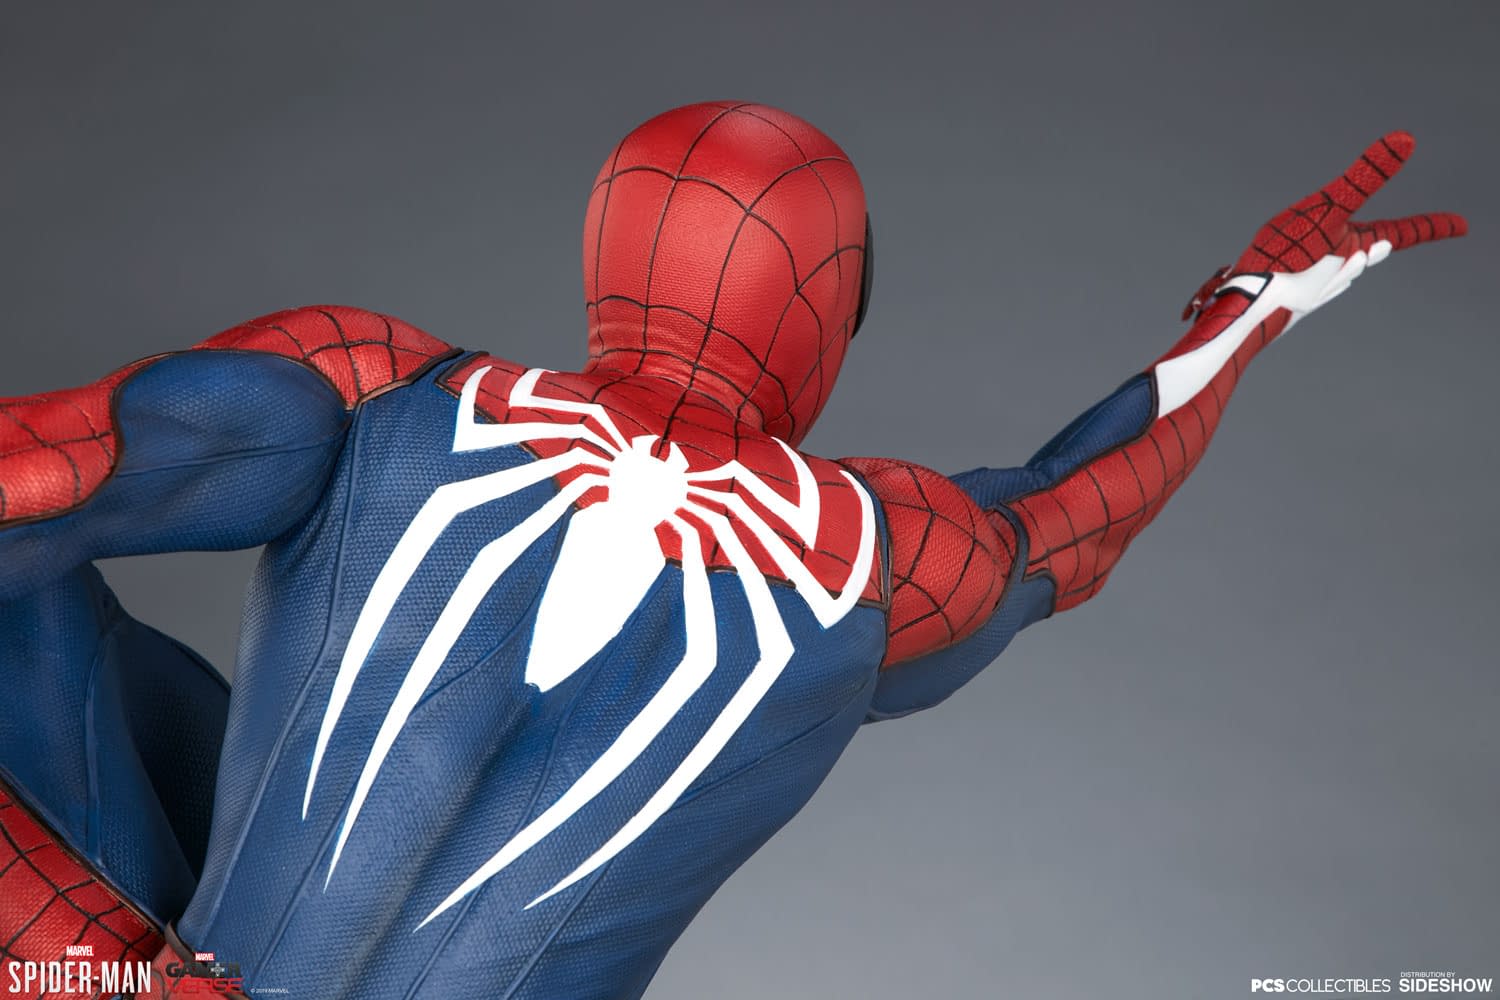 Spider-Man PS4 Thwips on Over with New Statue from PCS Collectibles 